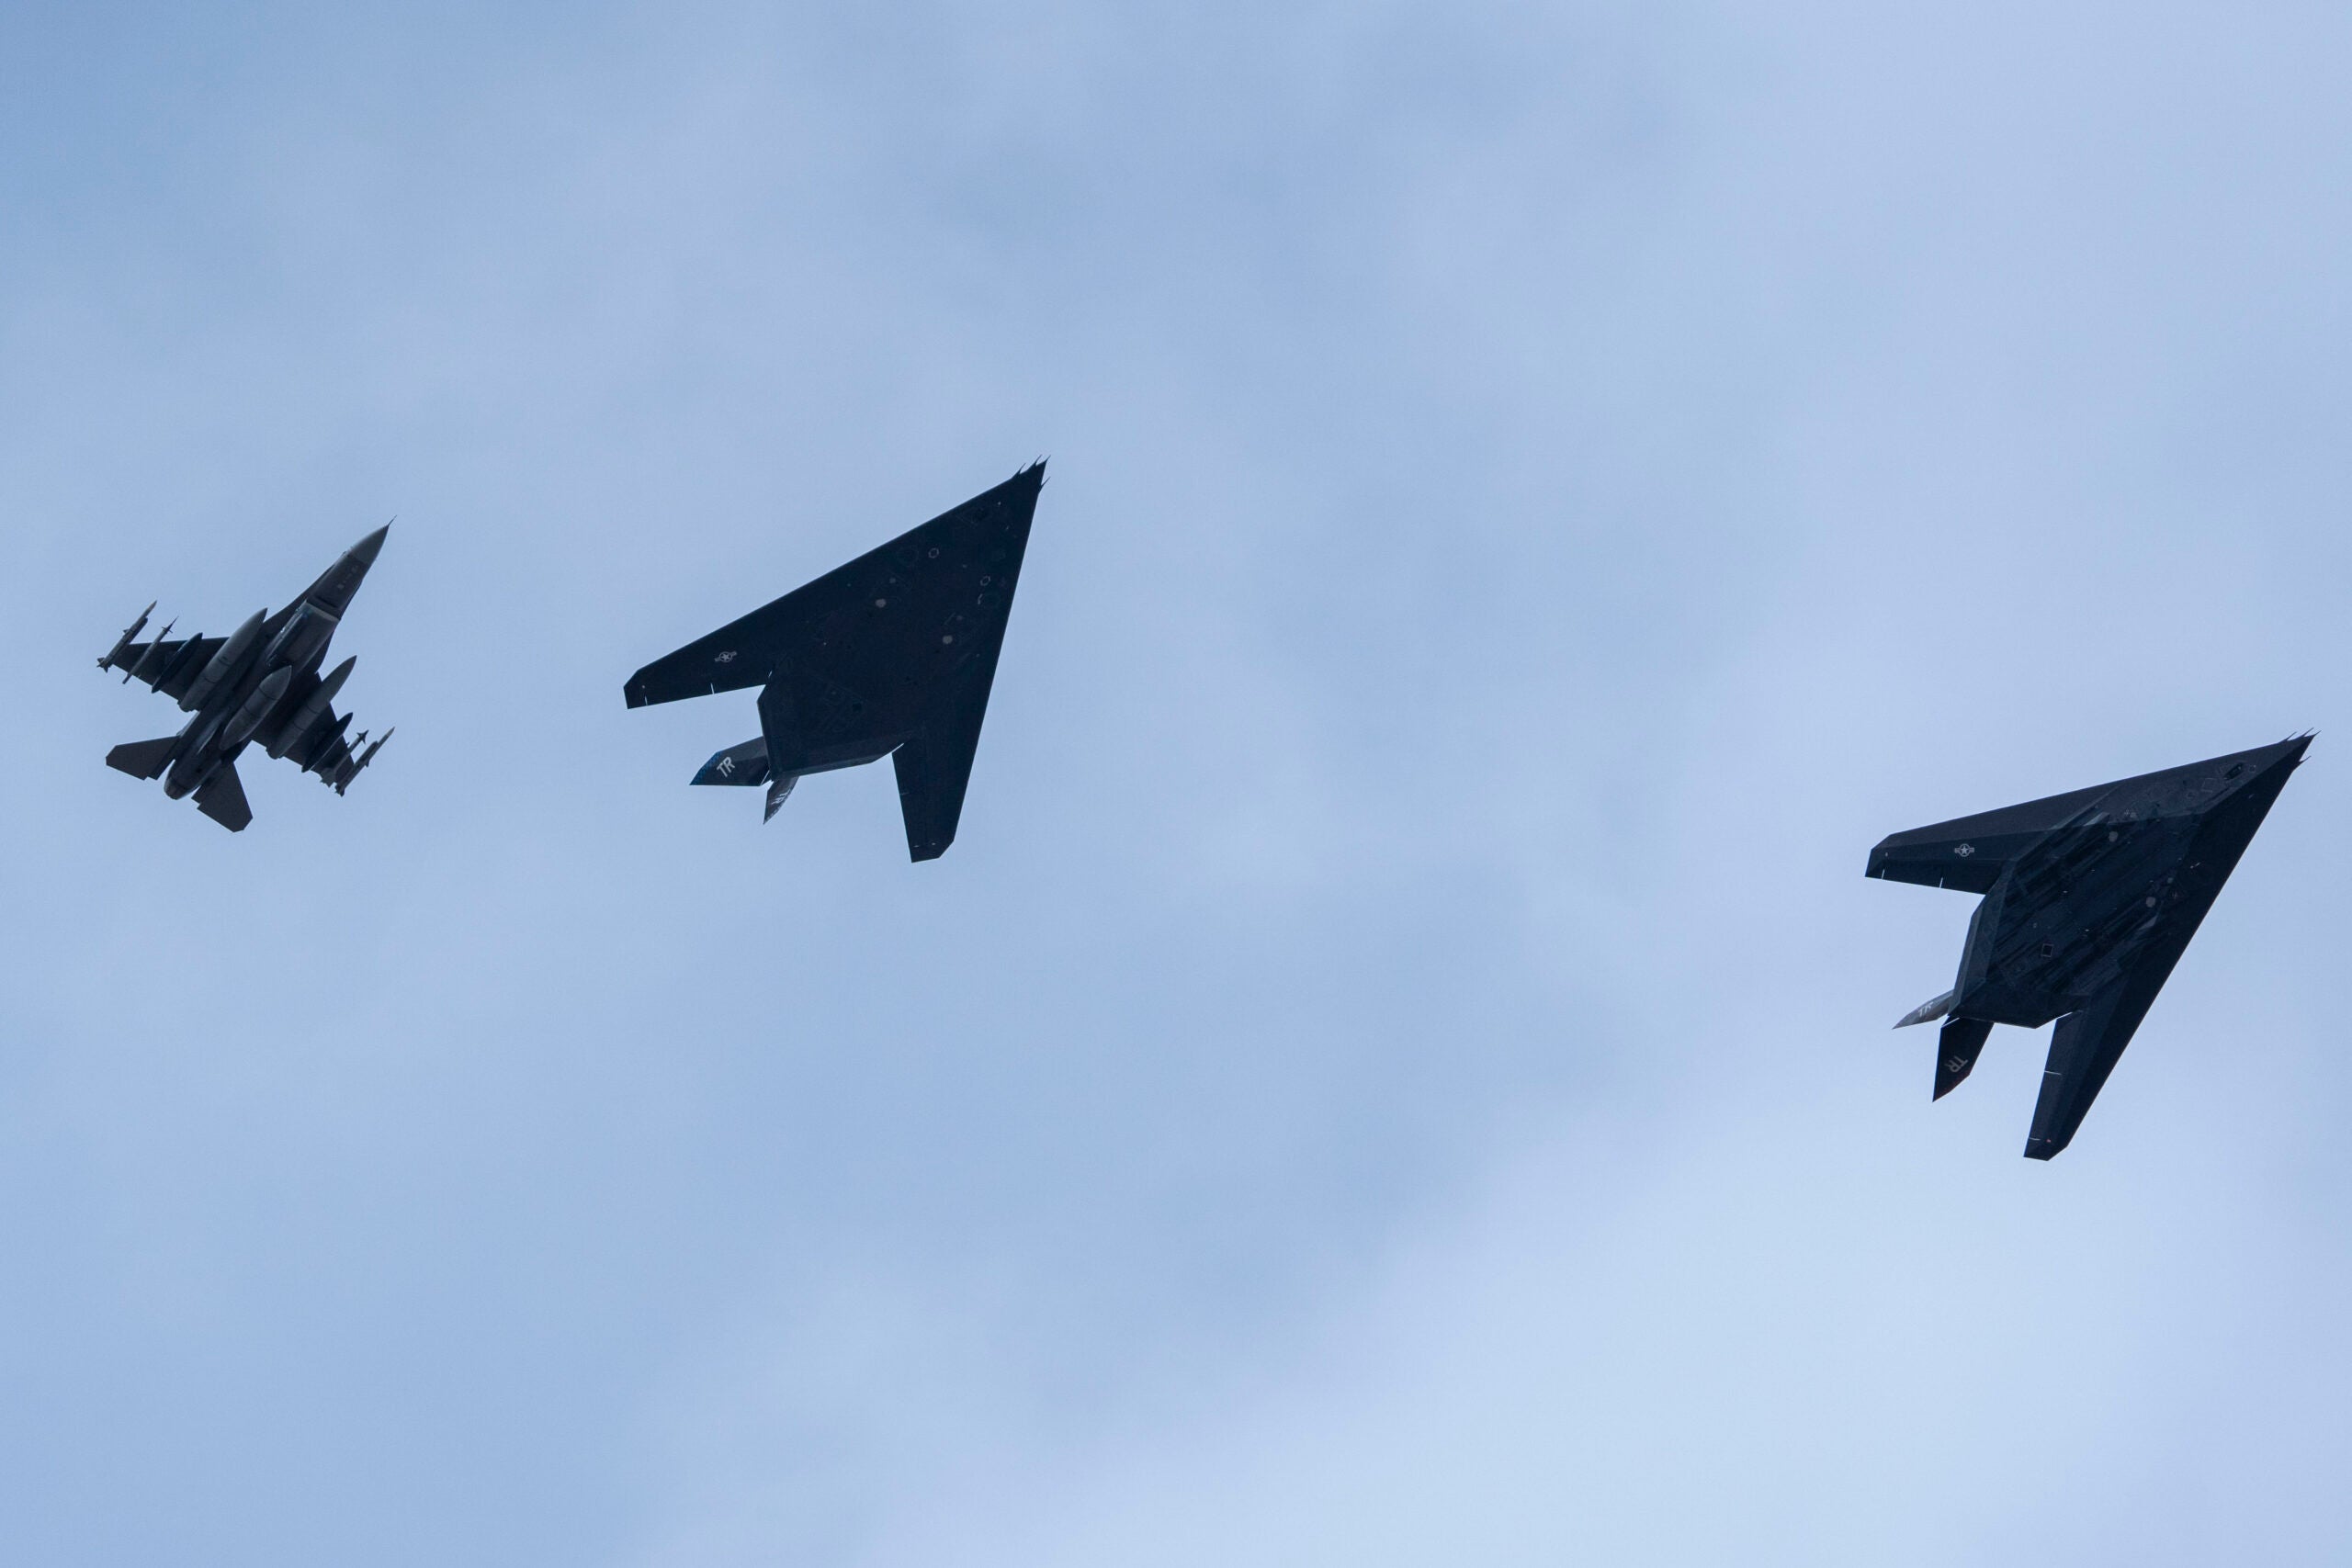 Two U.S. Air Force F-117 Nighthawks escorted by a F-16 Fighting Falcon assigned to the 42nd Test and Evaluation Squadron, Nellis Air Force Base, New Mexico, prepare to land during Northern Edge 23-1 at Joint Base Elmendorf-Richardson, Alaska, May 10, 2023. Northern Edge 23-1 provides an opportunity for joint, multinational and multi-domain operations designed to implement high-end, realistic war fighter training, develop and improve joint interoperability, and enhance the combat readiness of participating forces. (U.S. Air Force photo by Airman 1st Class Julia Lebens)